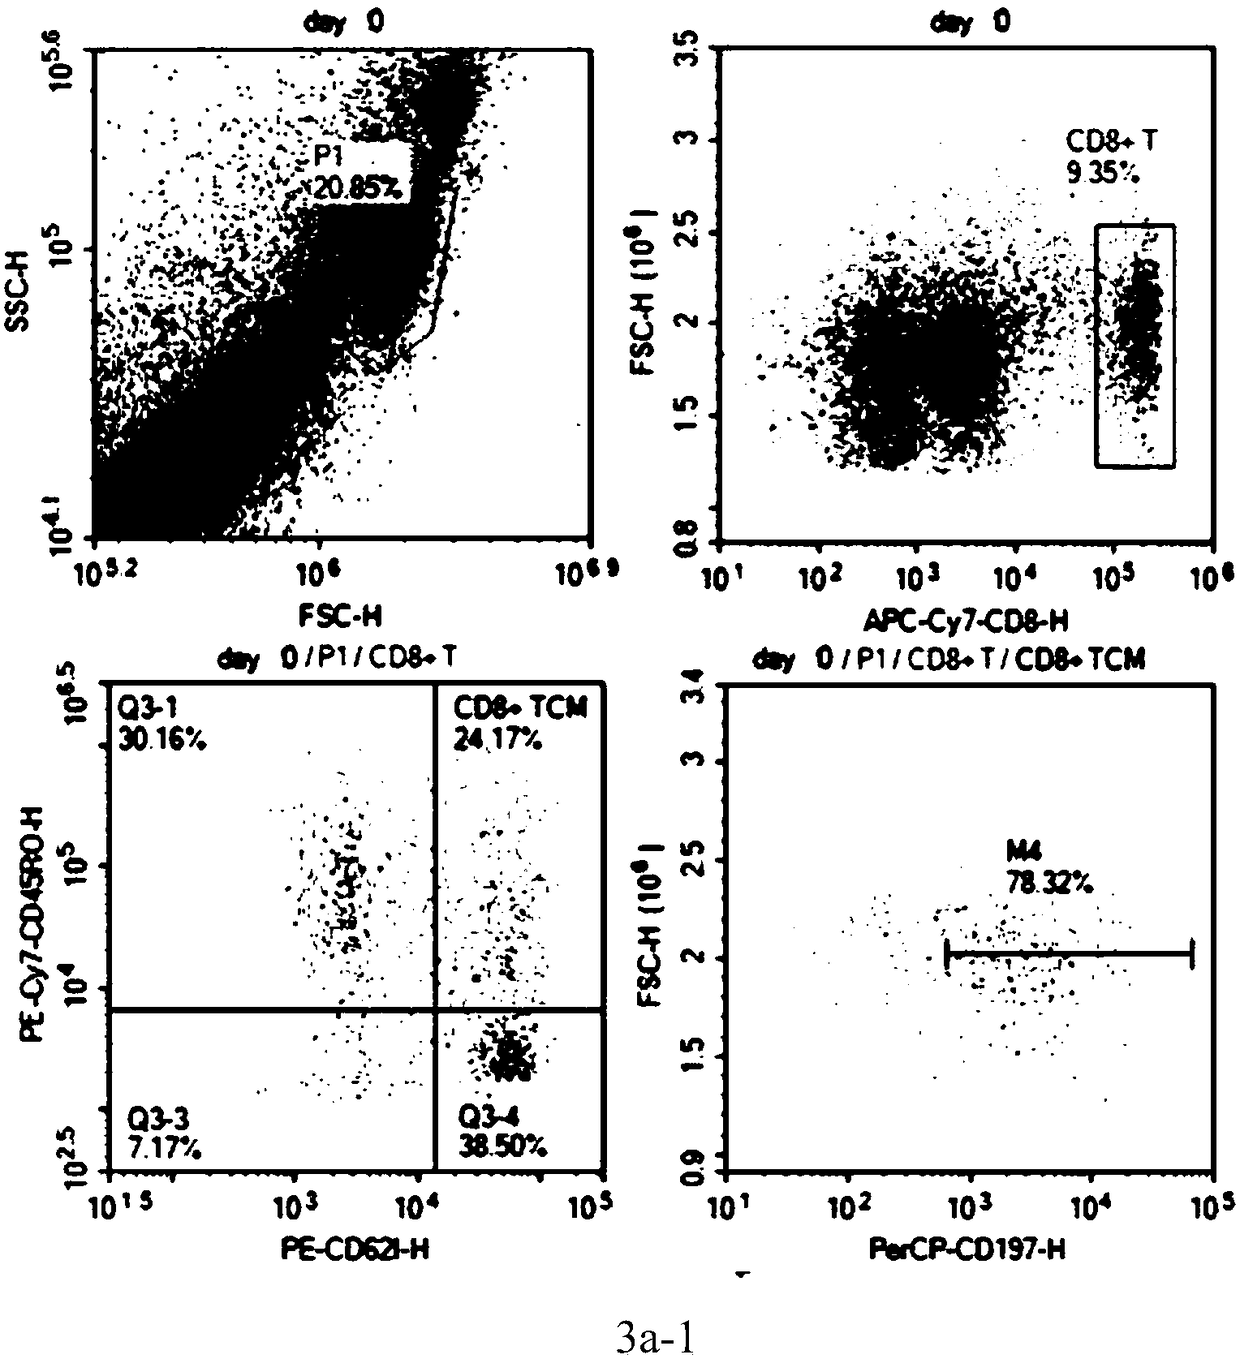 Medium and application thereof in central memory T lymphocyte culture